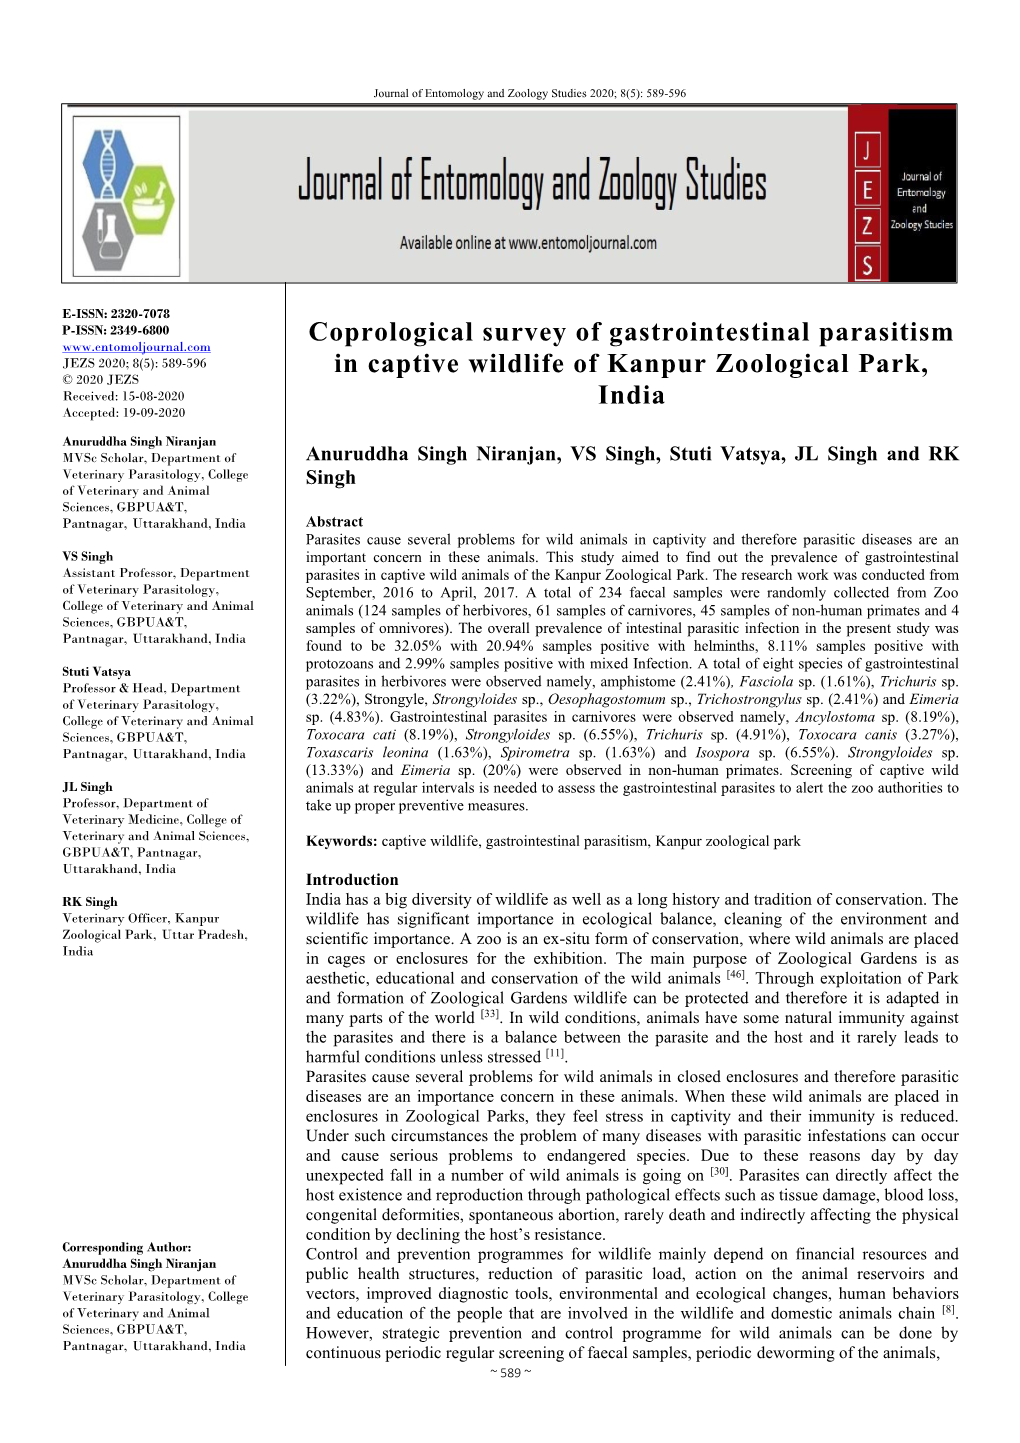 Coprological Survey of Gastrointestinal Parasitism in Captive Wildlife Of